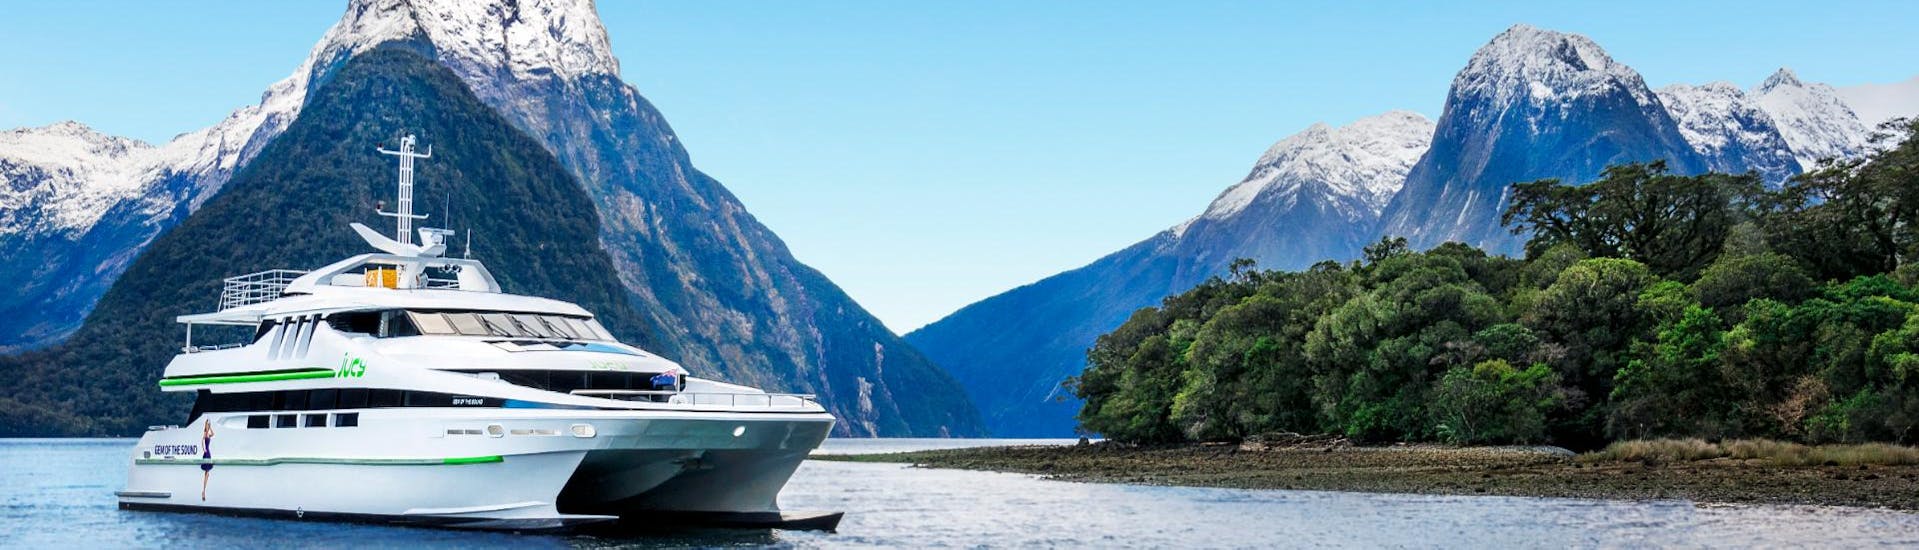 During the Milford Sound Cruise "Premium" - Summer, people aboard the superb catamaran from Jucy Cruise are enjoying the spectacular views. 